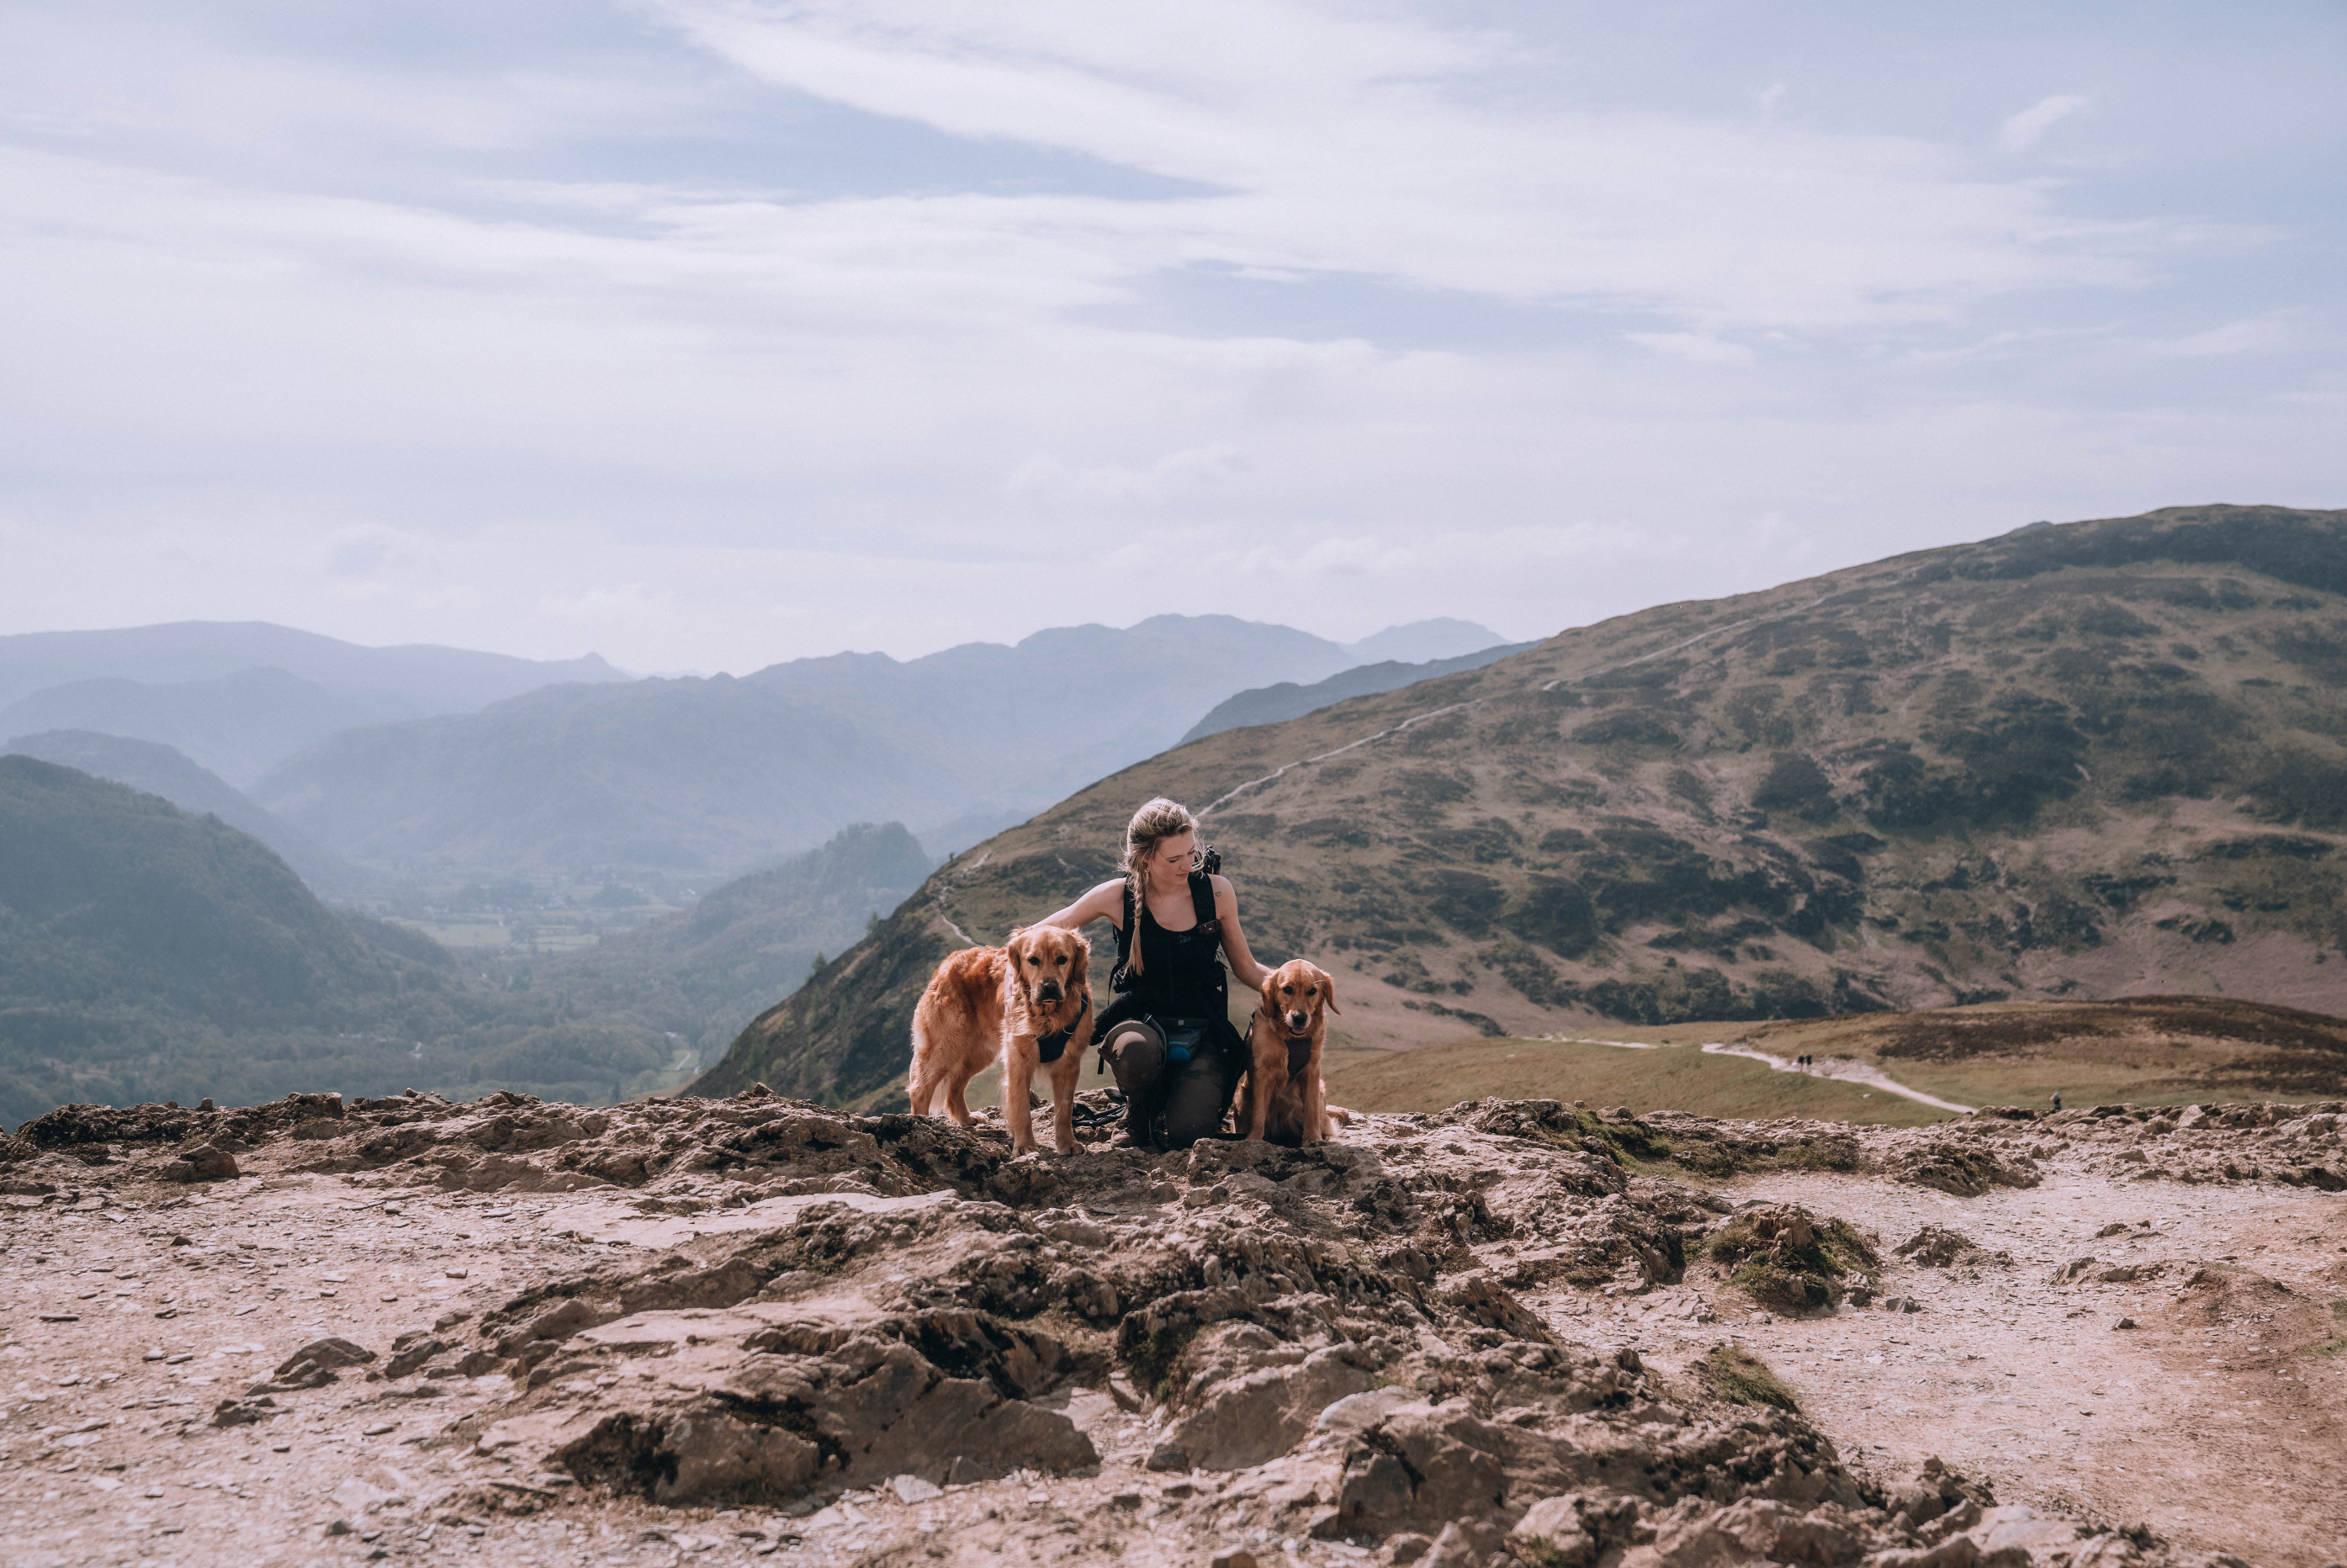 Woman and two dogs high up on a ridgeline in the mountains.